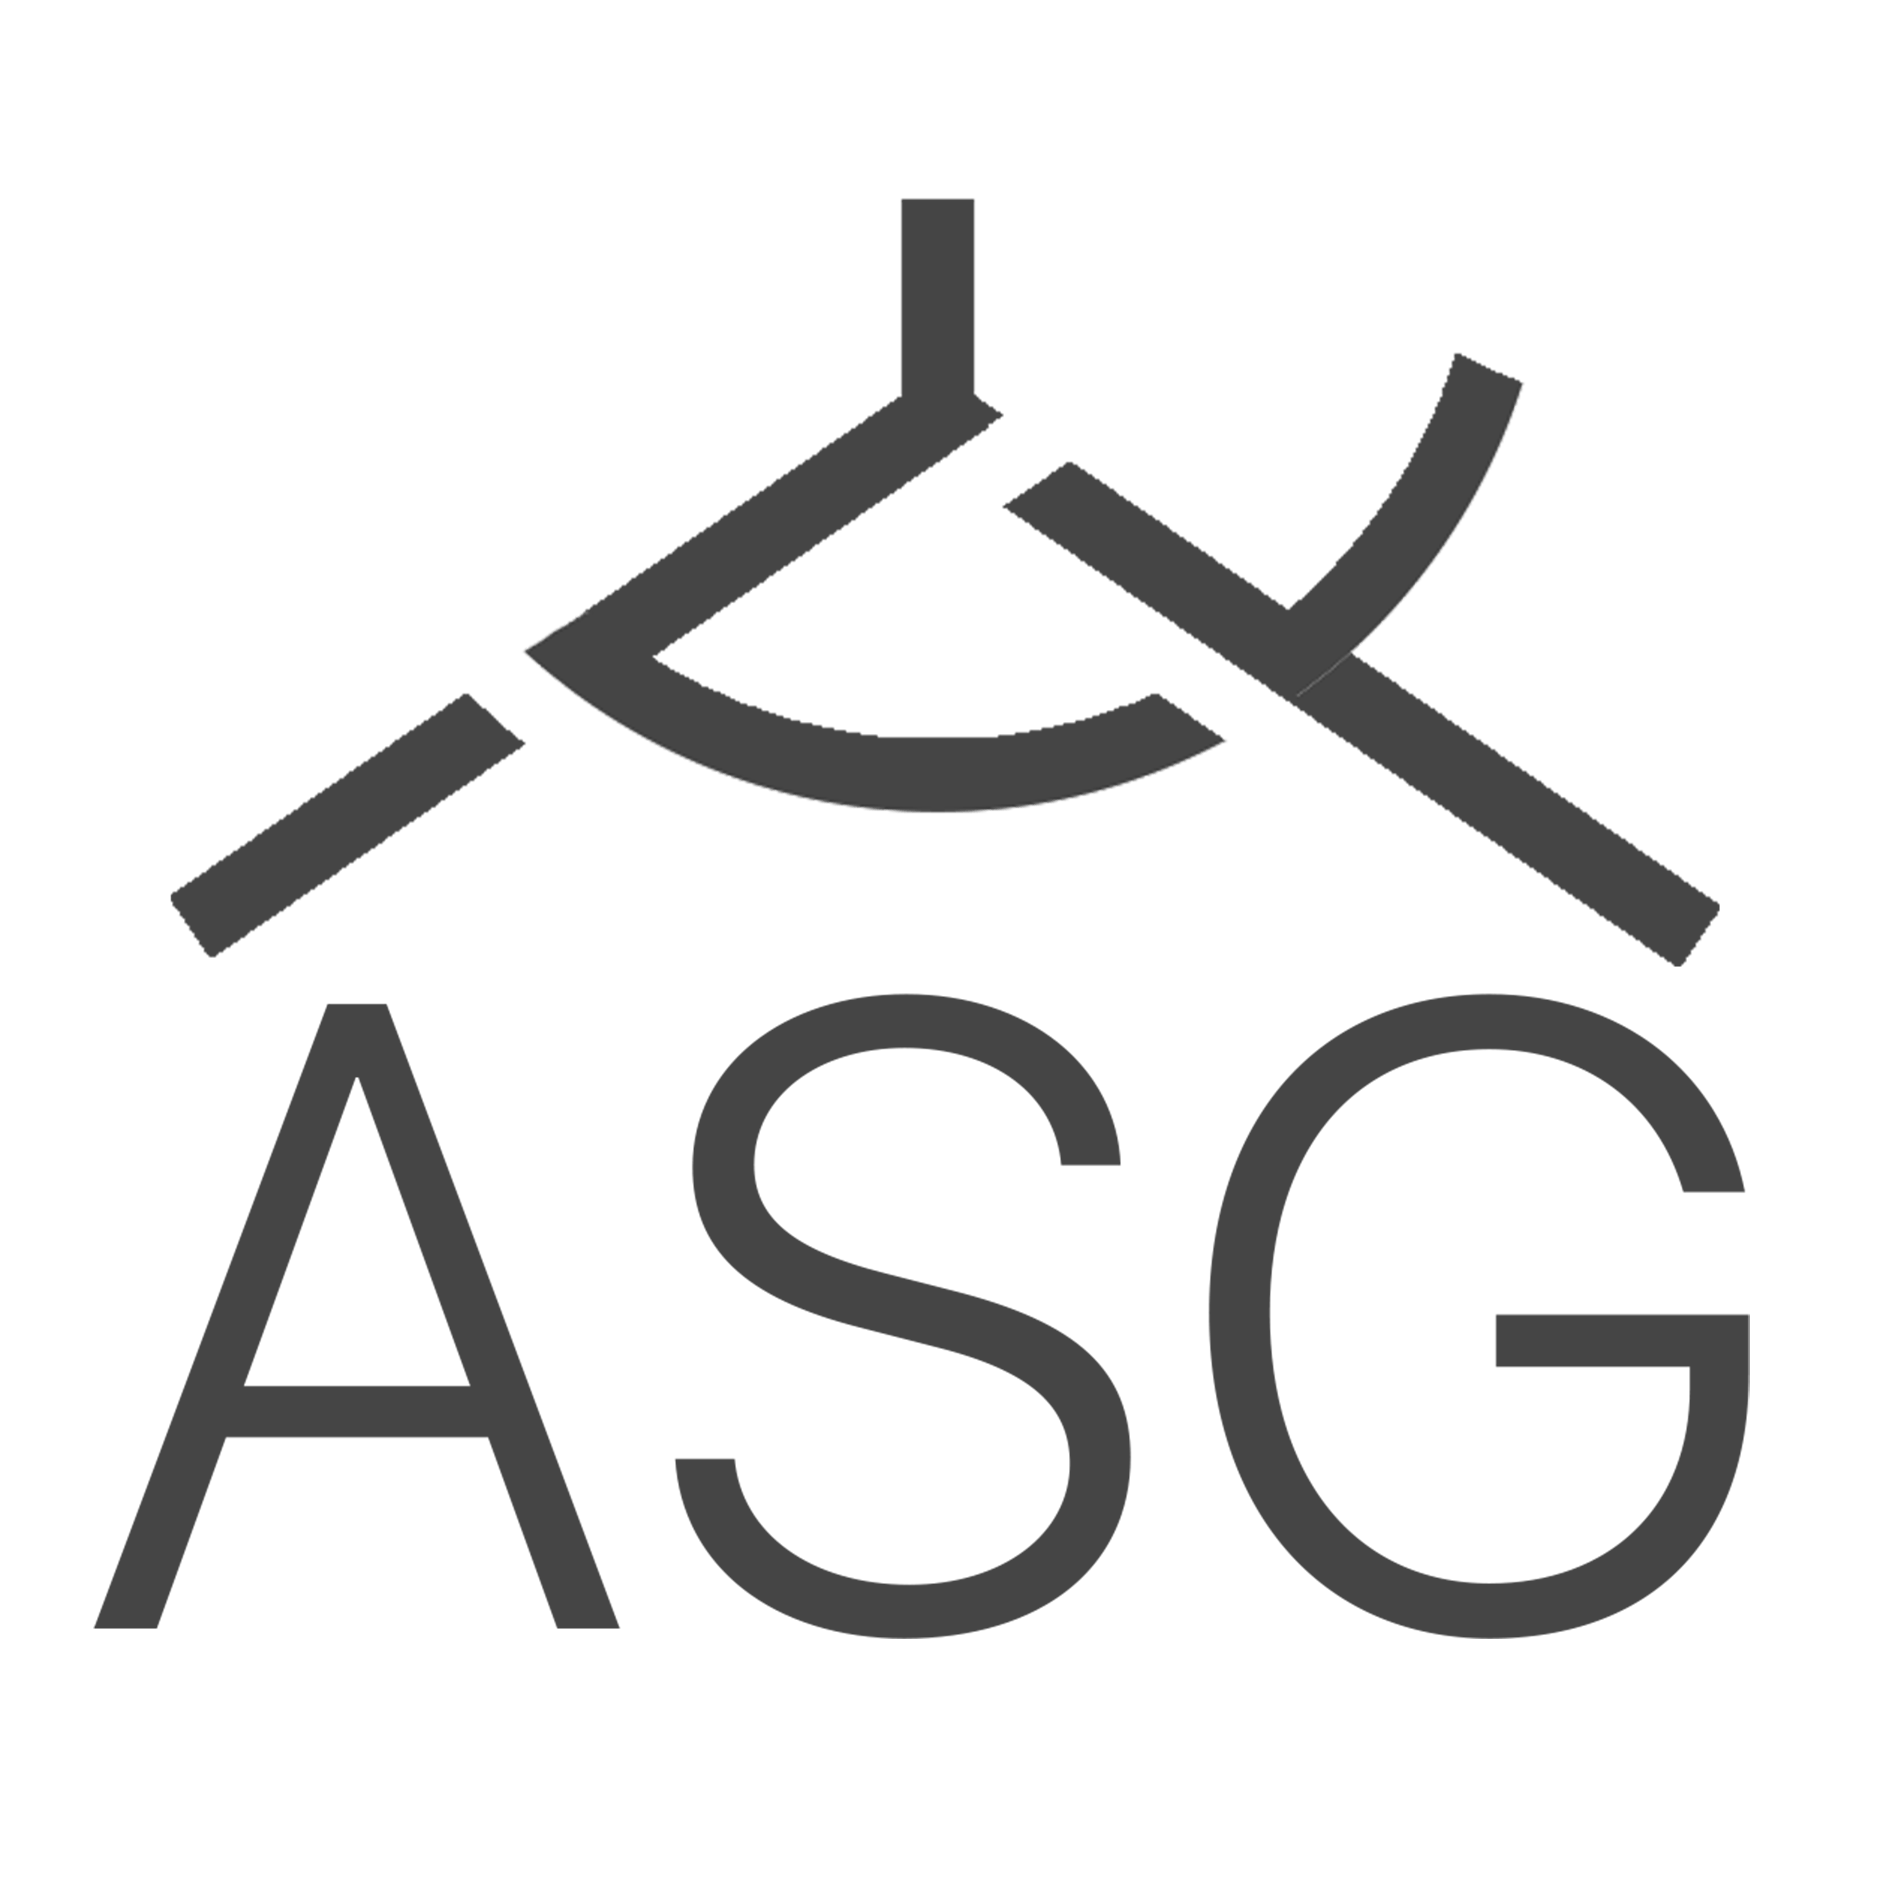 ASG Logo - Architecture for your home and business Services Group